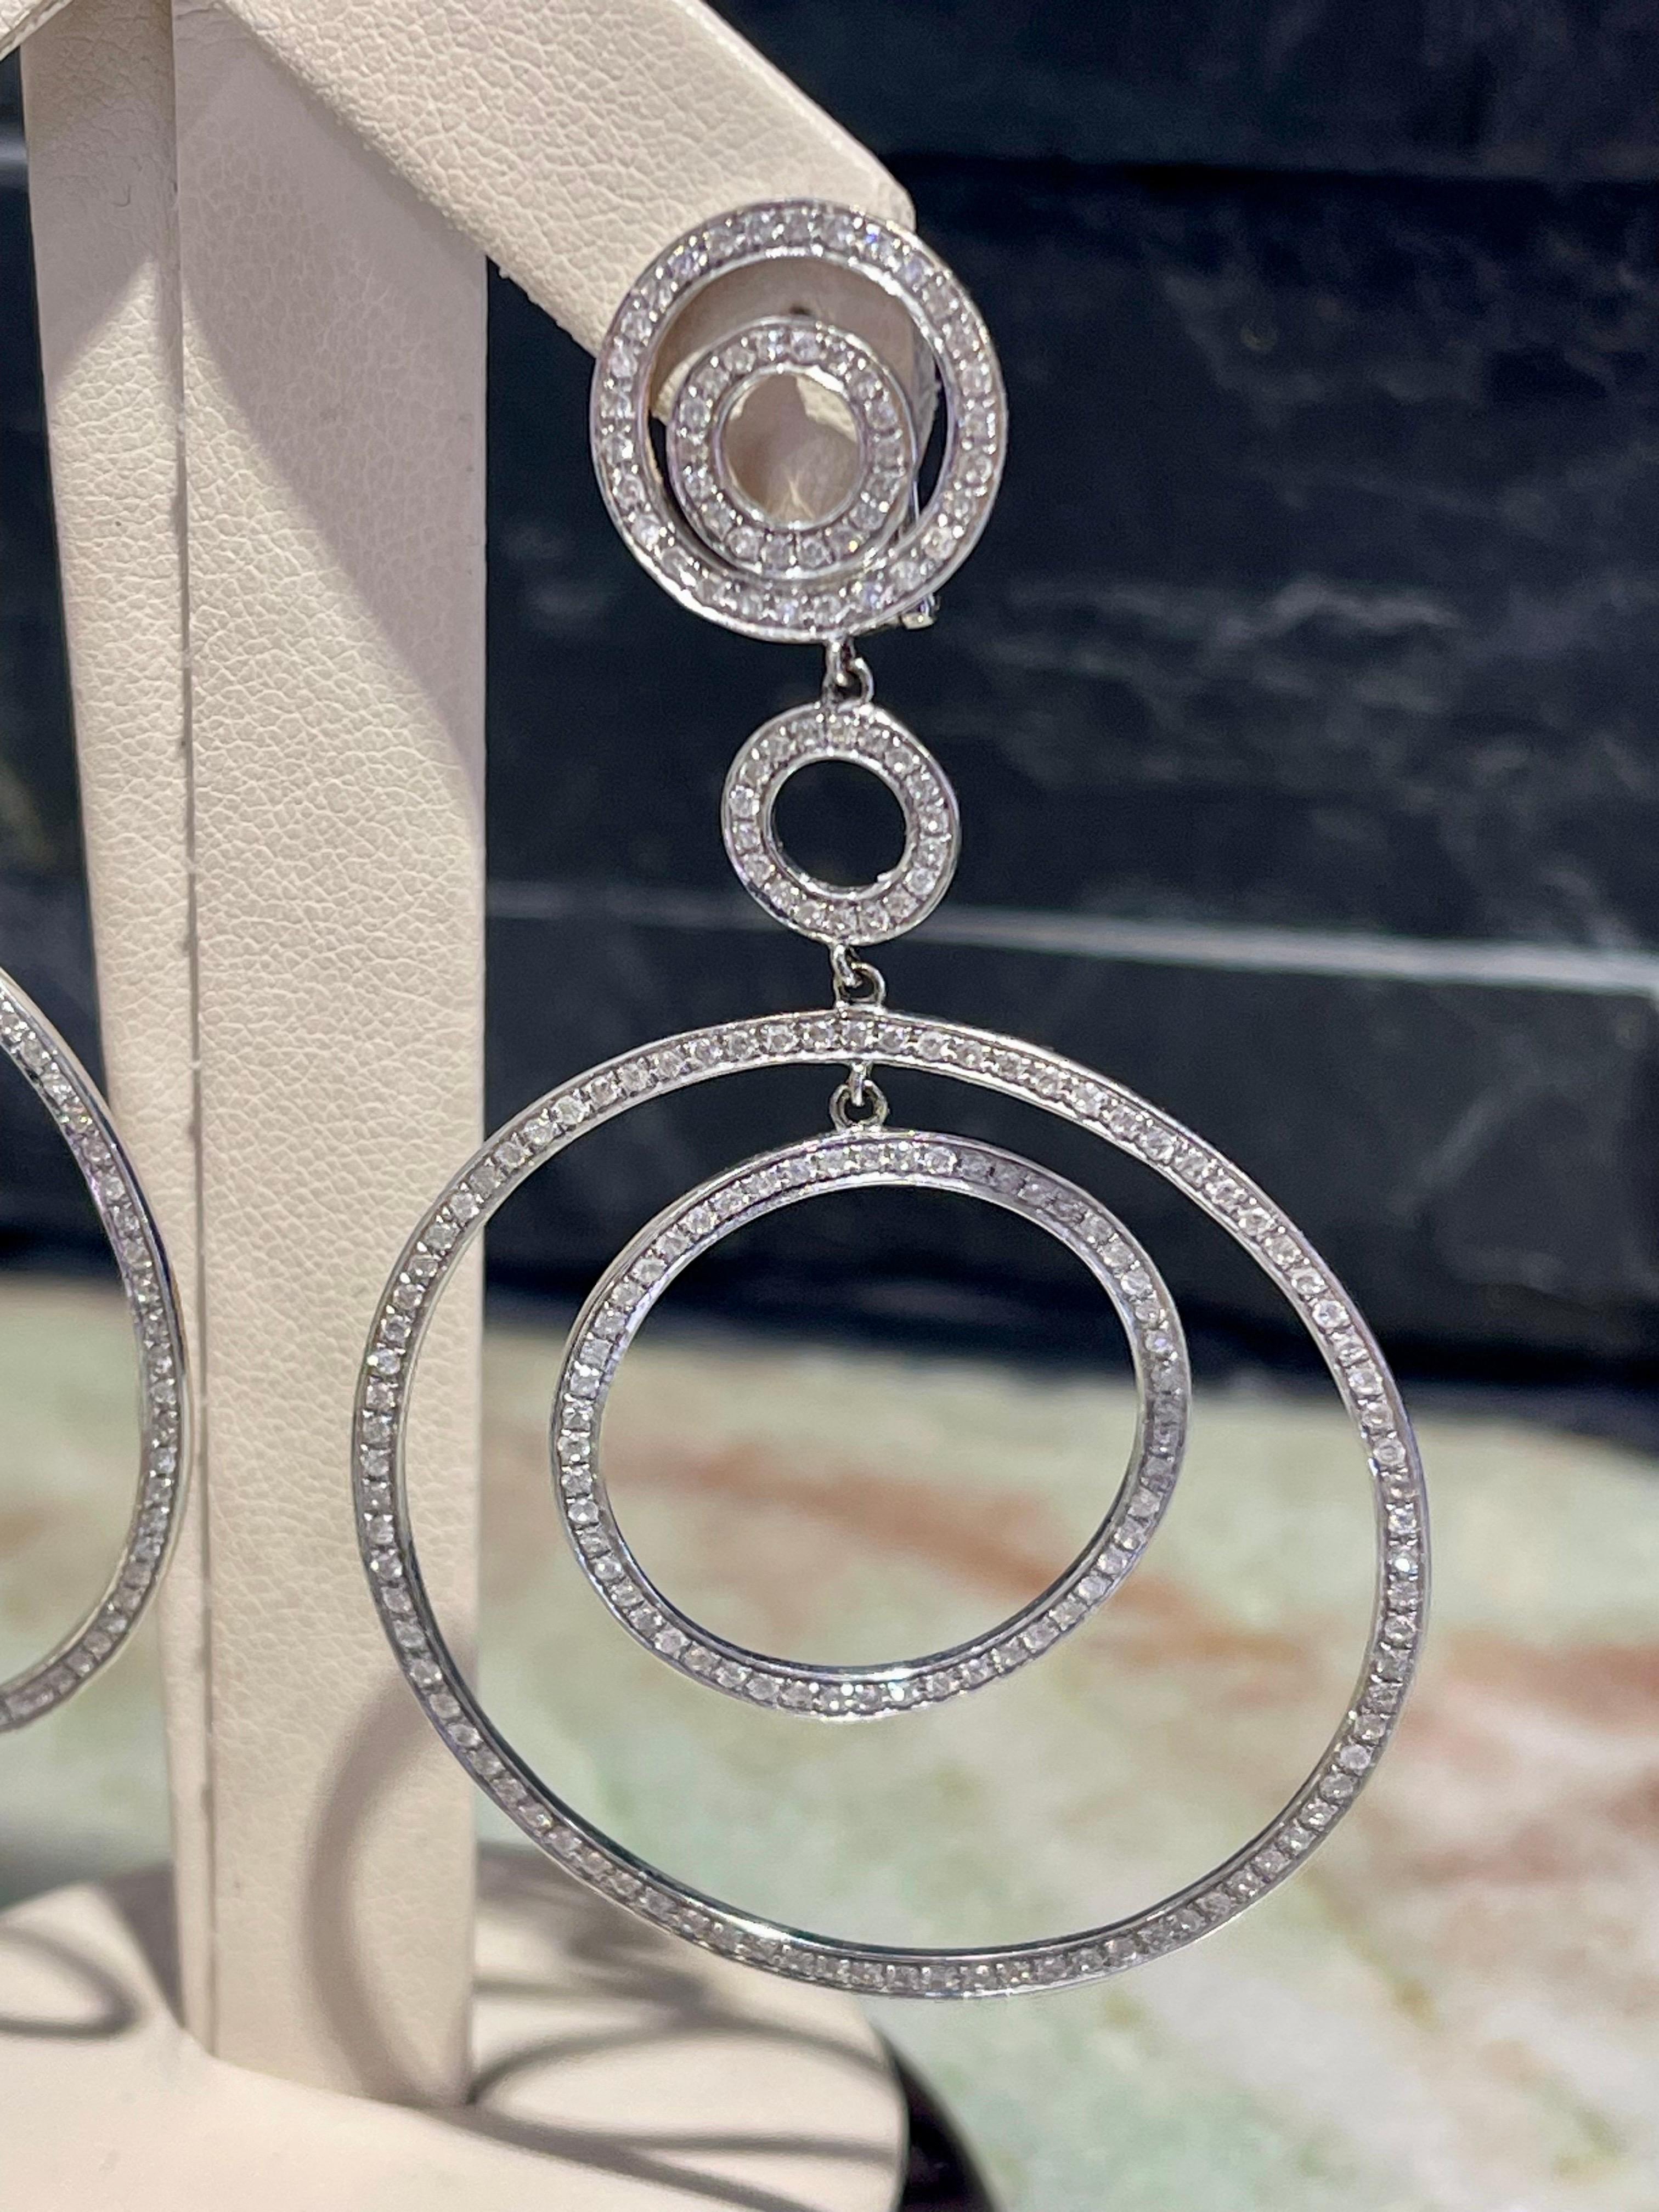 Stunning Diamond Drop Earrings In 14k White Gold ,

Approximately 4 carats in diamonds,

Hanging length is 2.75”,

Diameter of the largest circle is 1.5”

Omega clasp